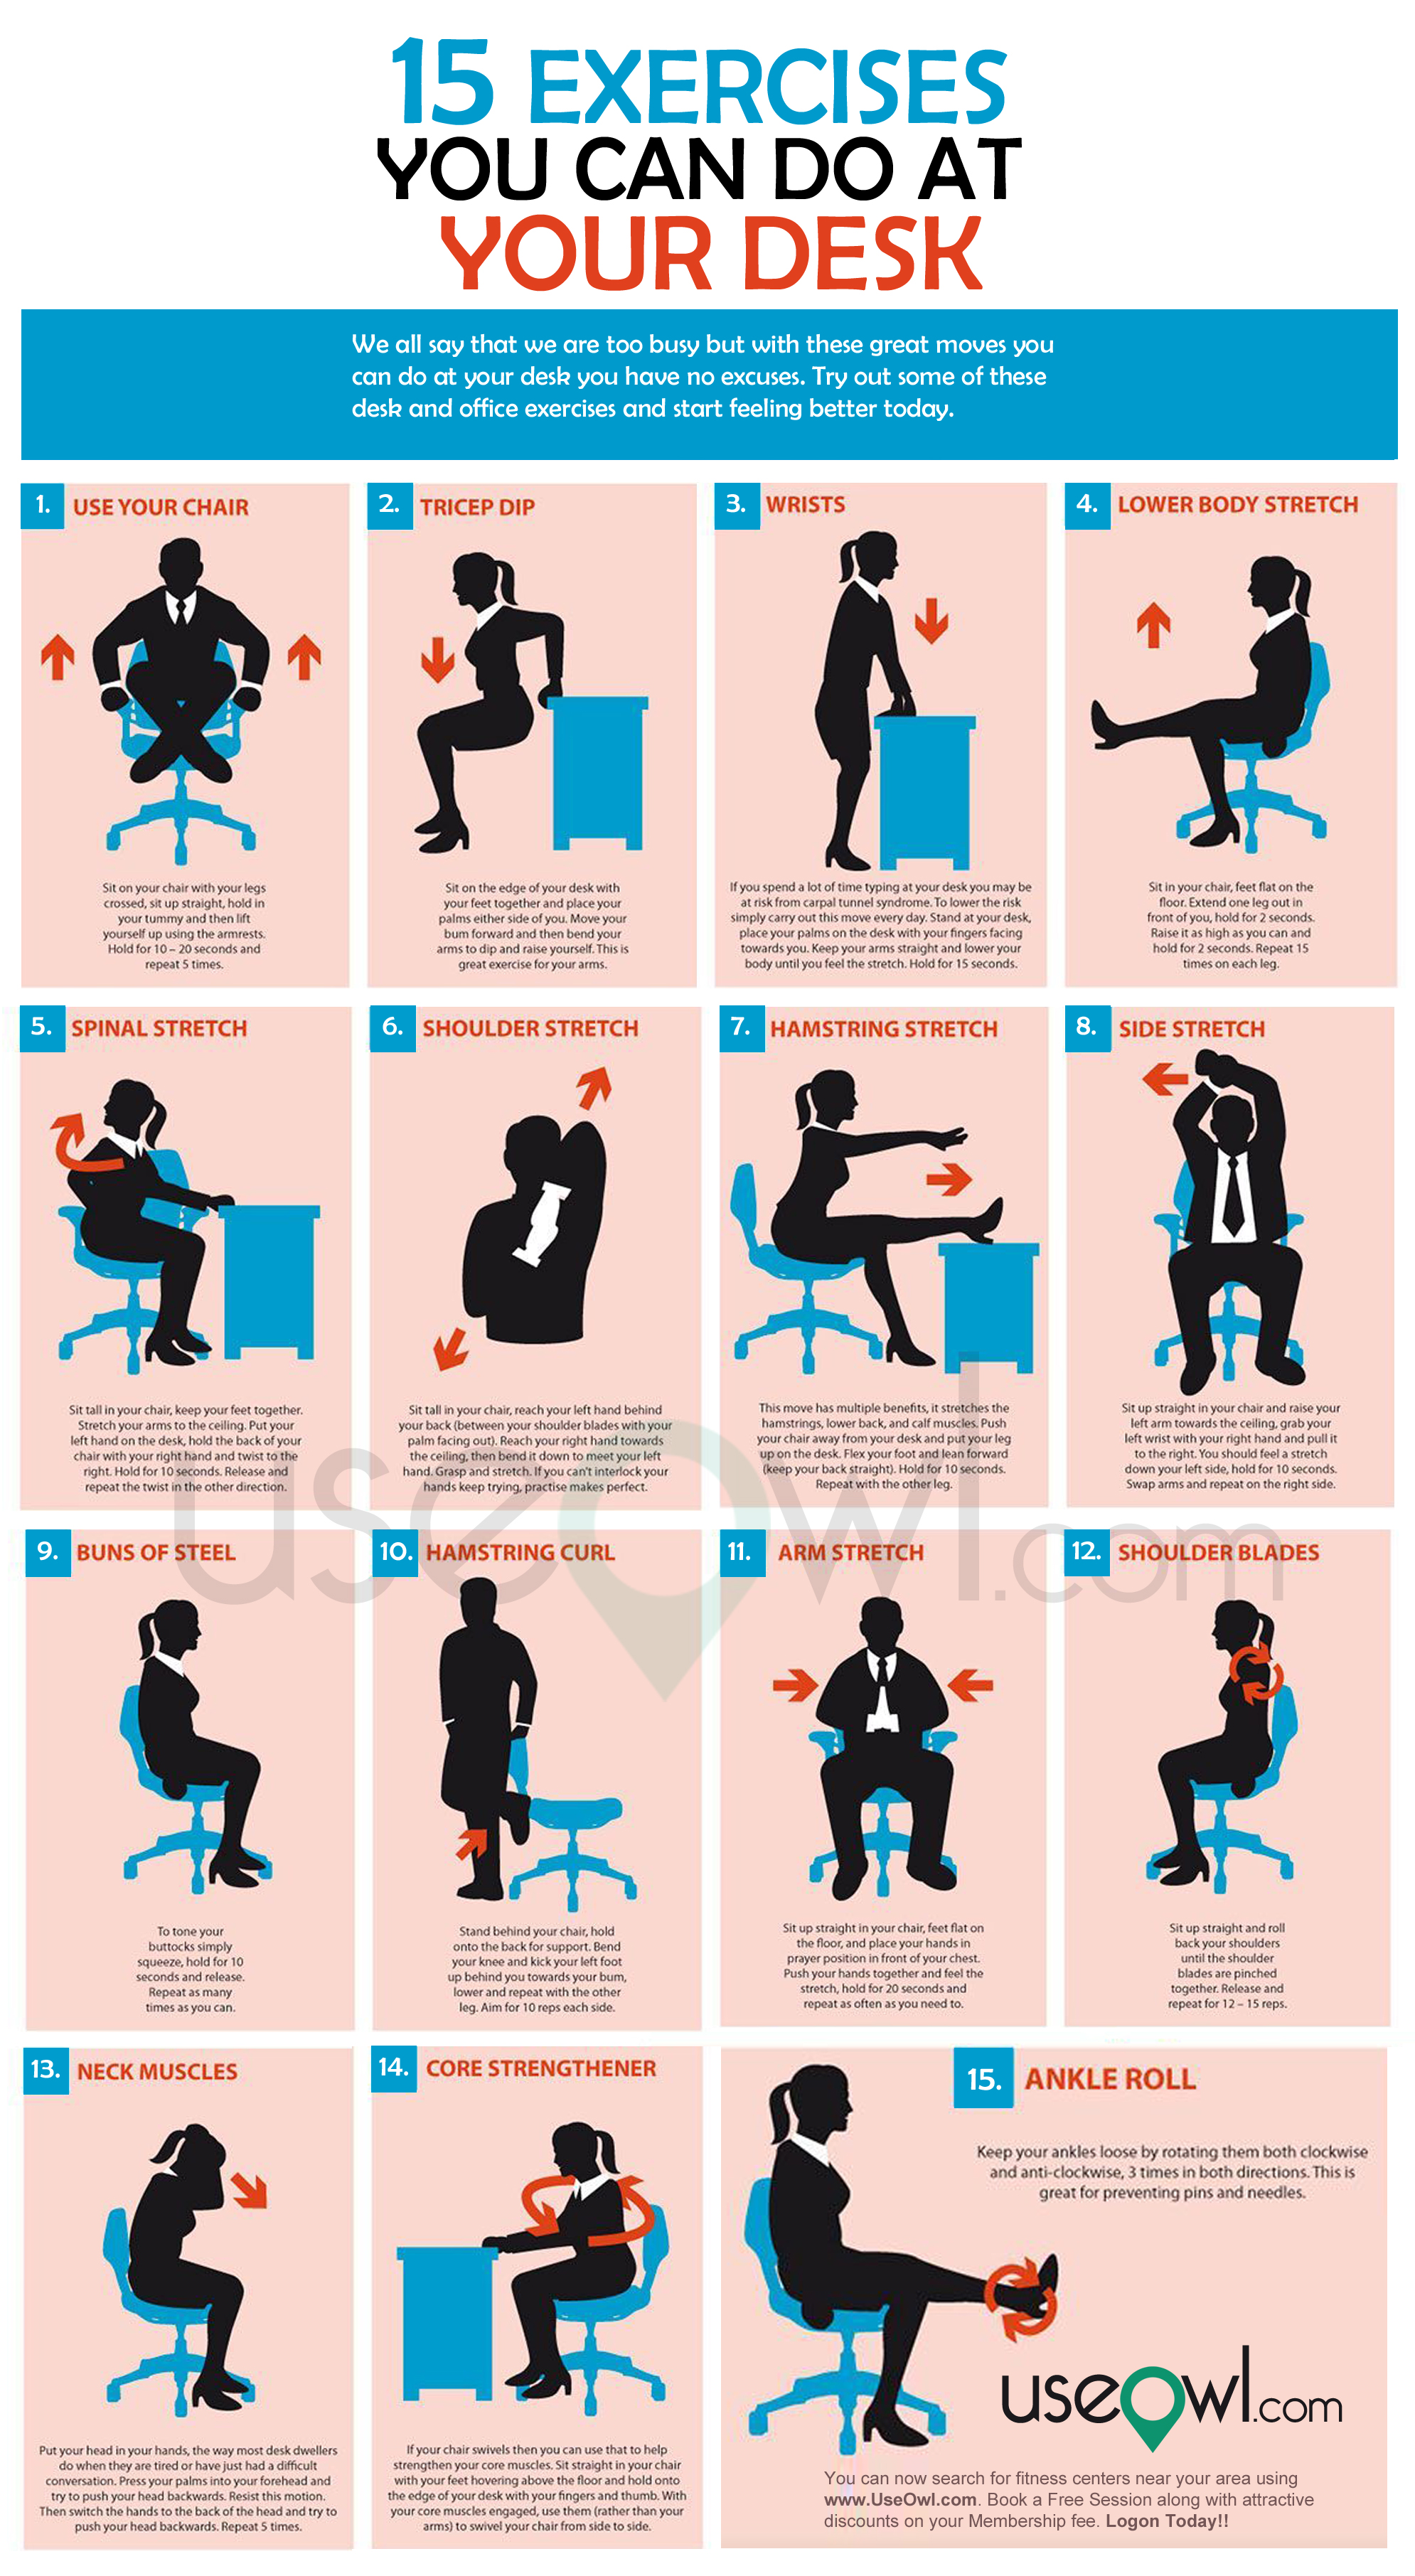 Desk Excercises Will Keep You Focused & Healthy